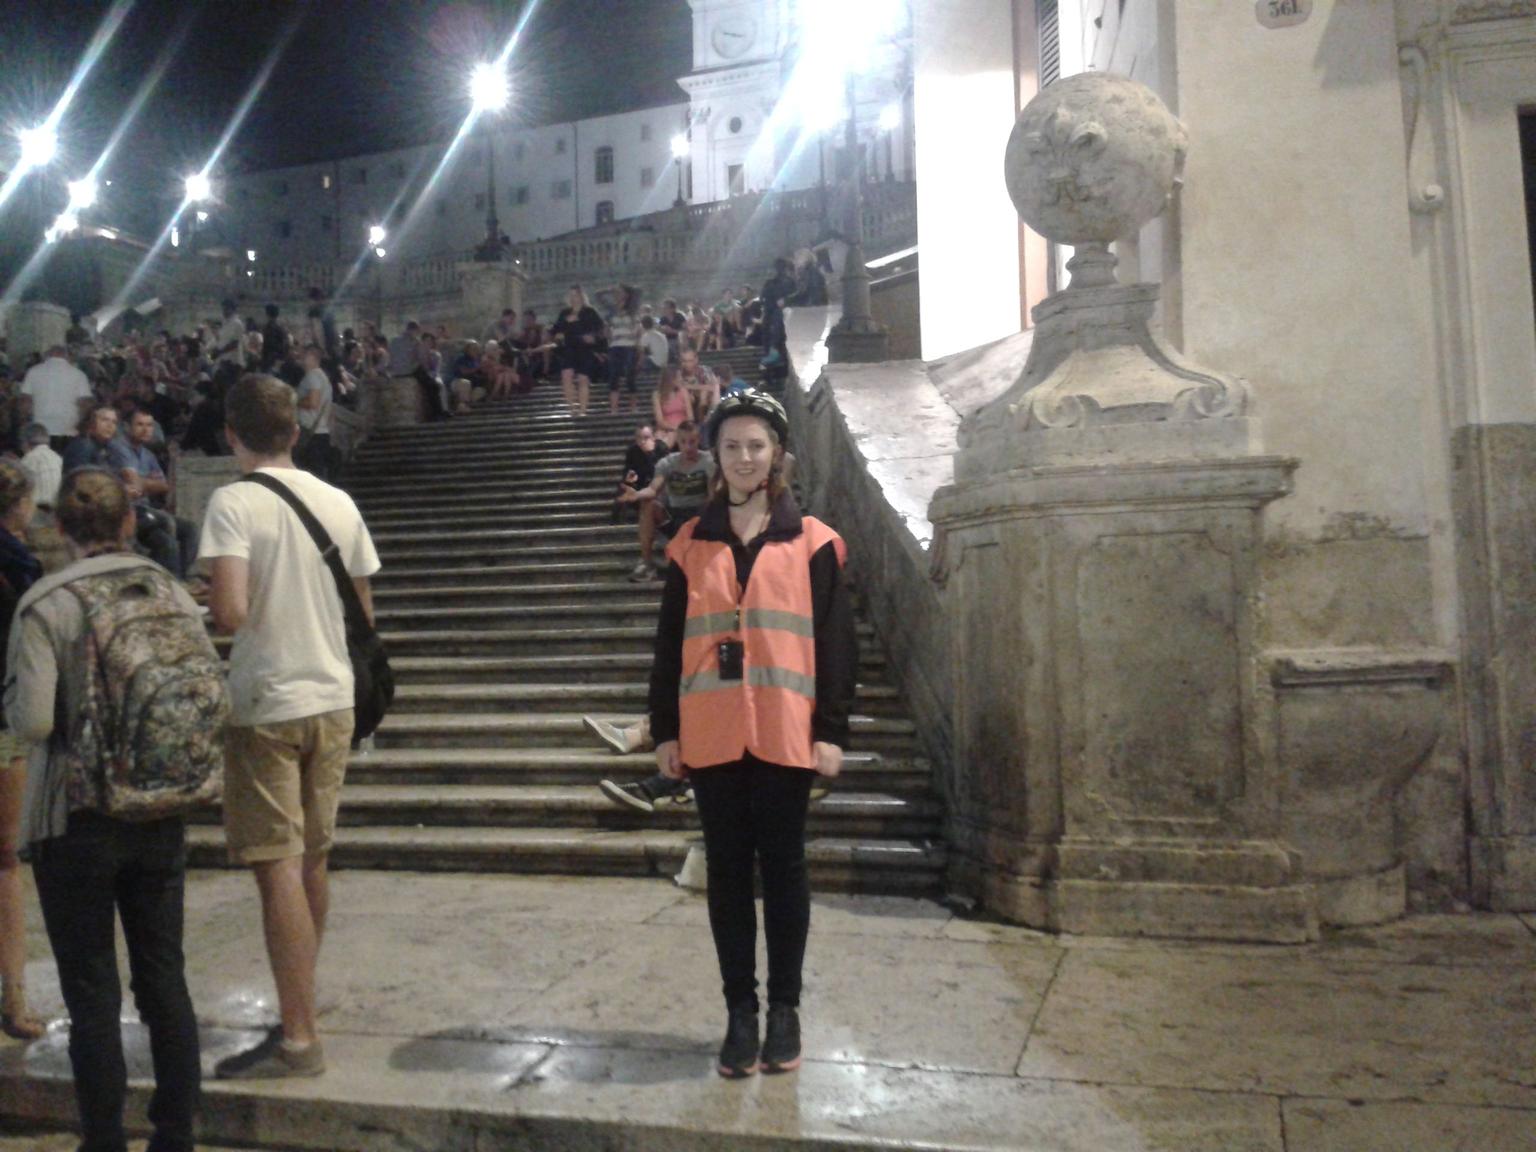 The Spanish steps by night